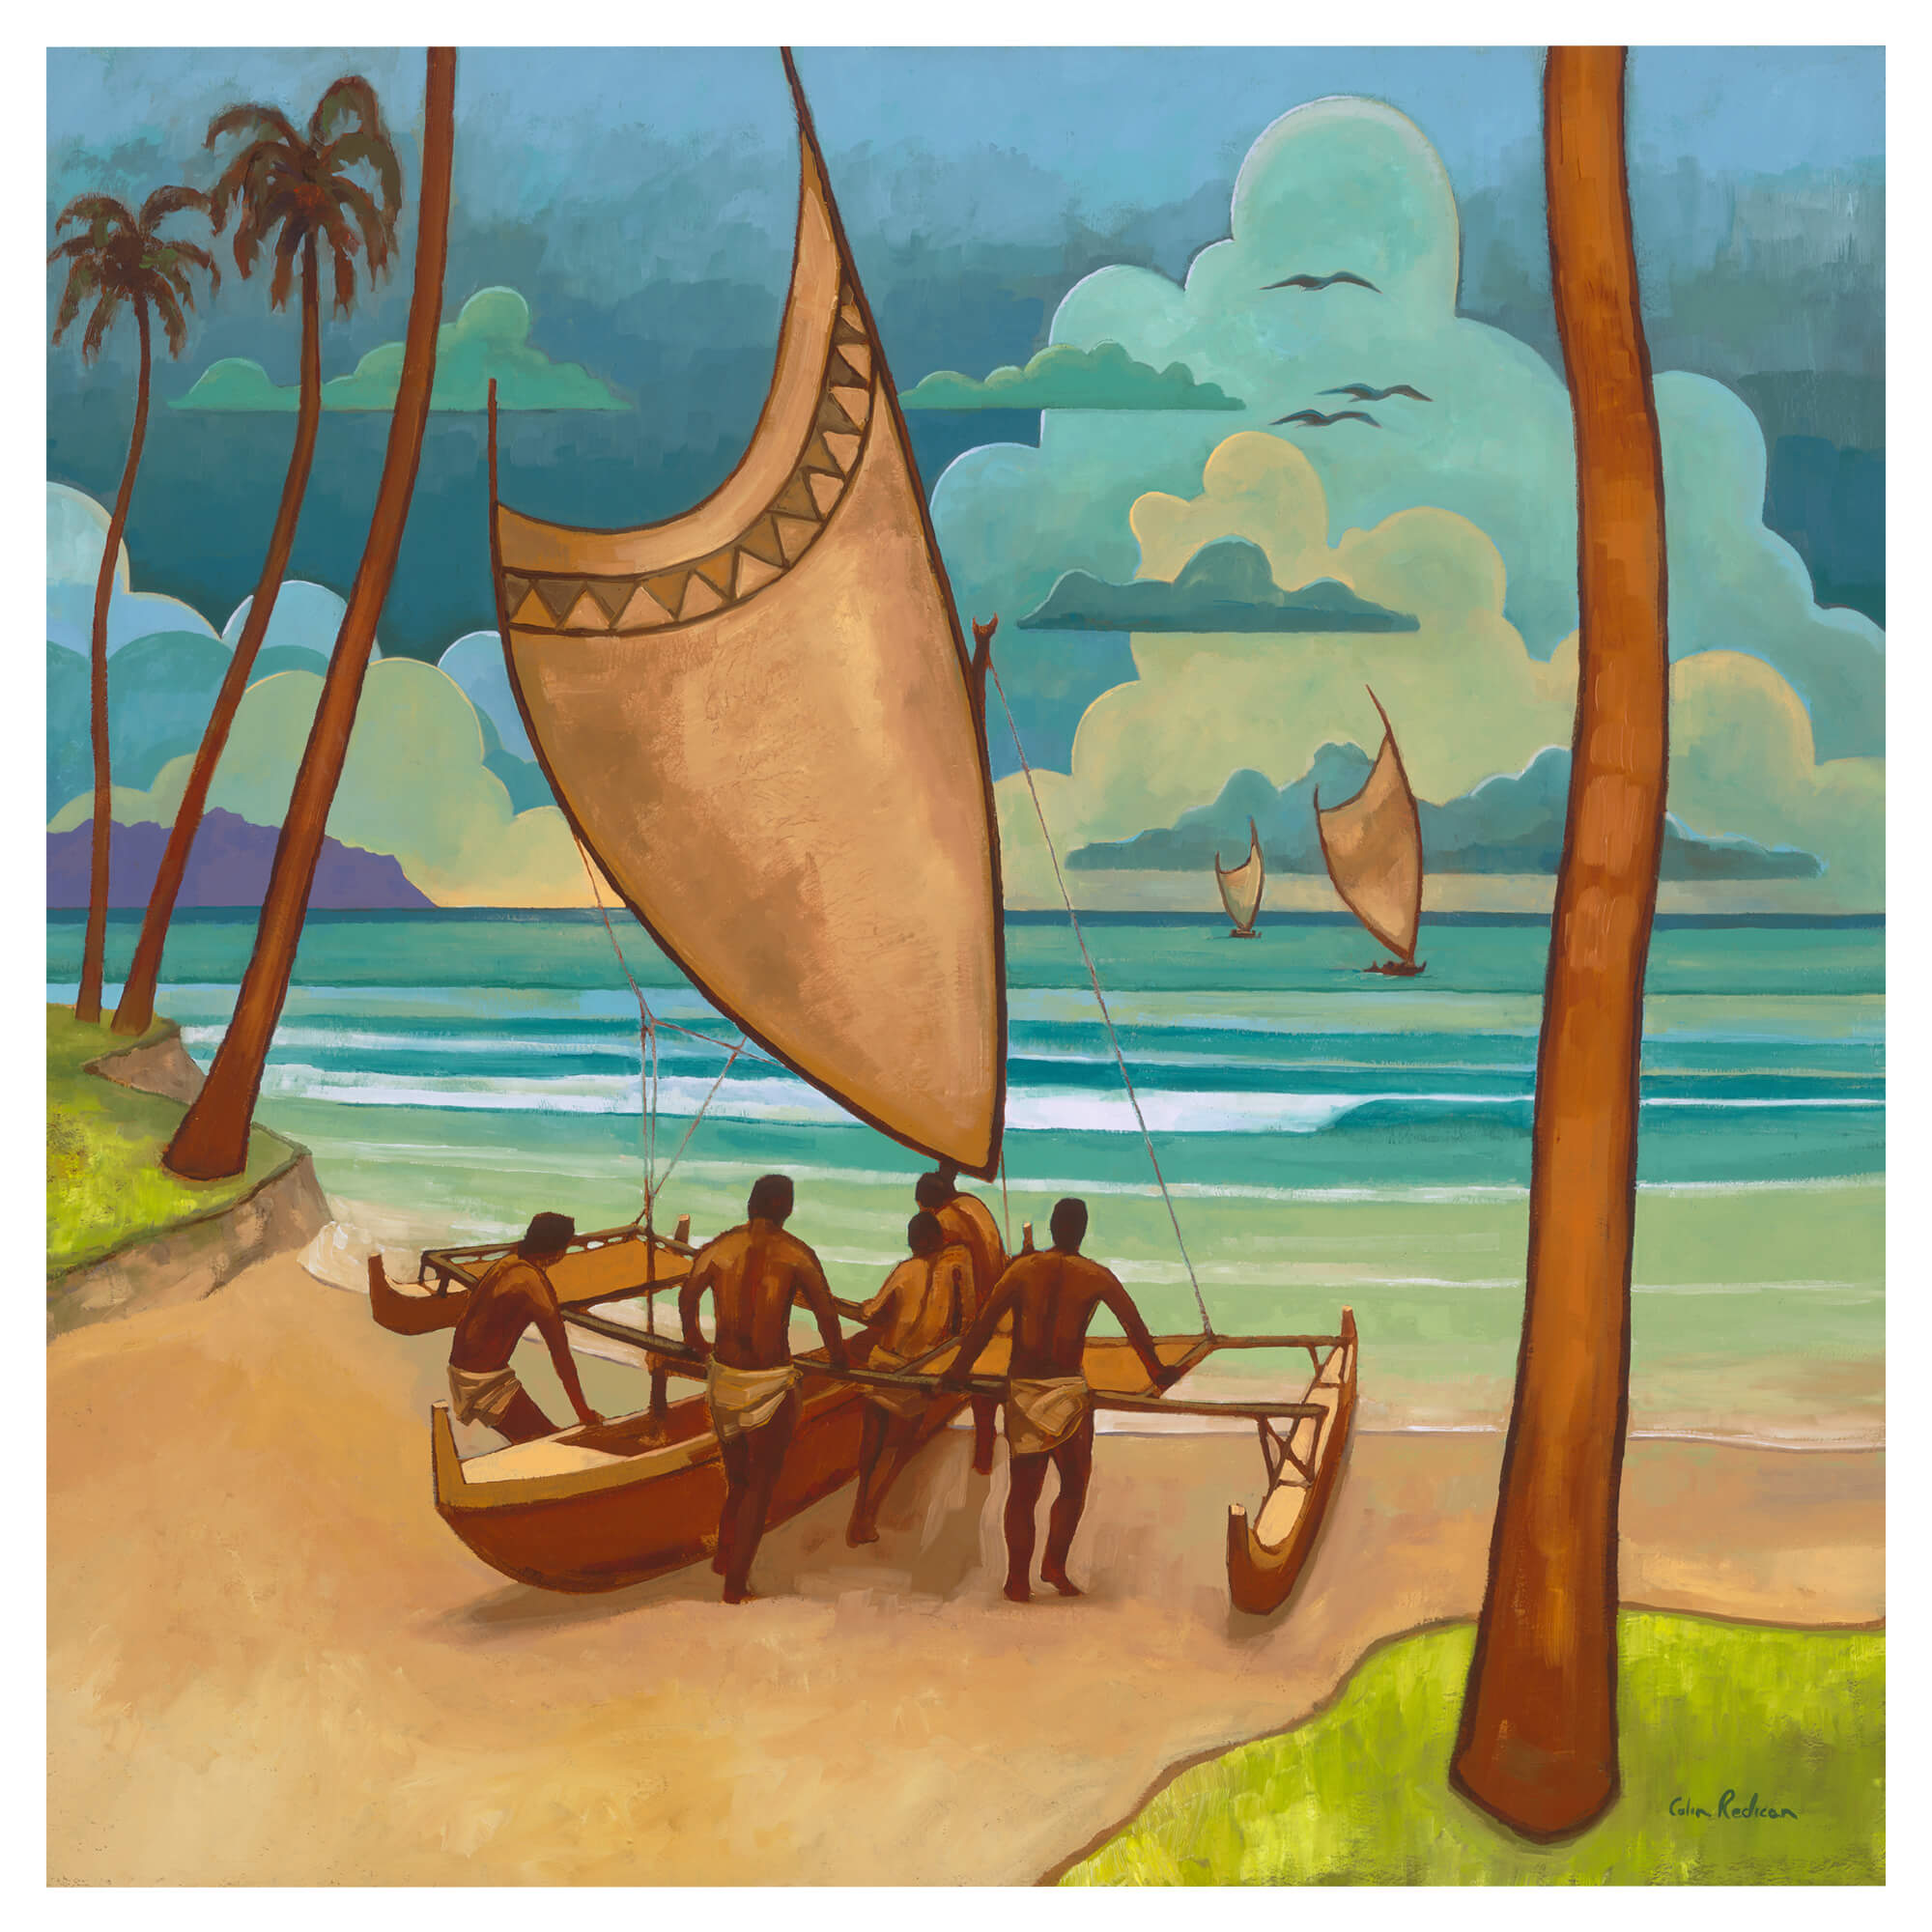 Men getting ready to sail by Hawaii artist Colin Redican